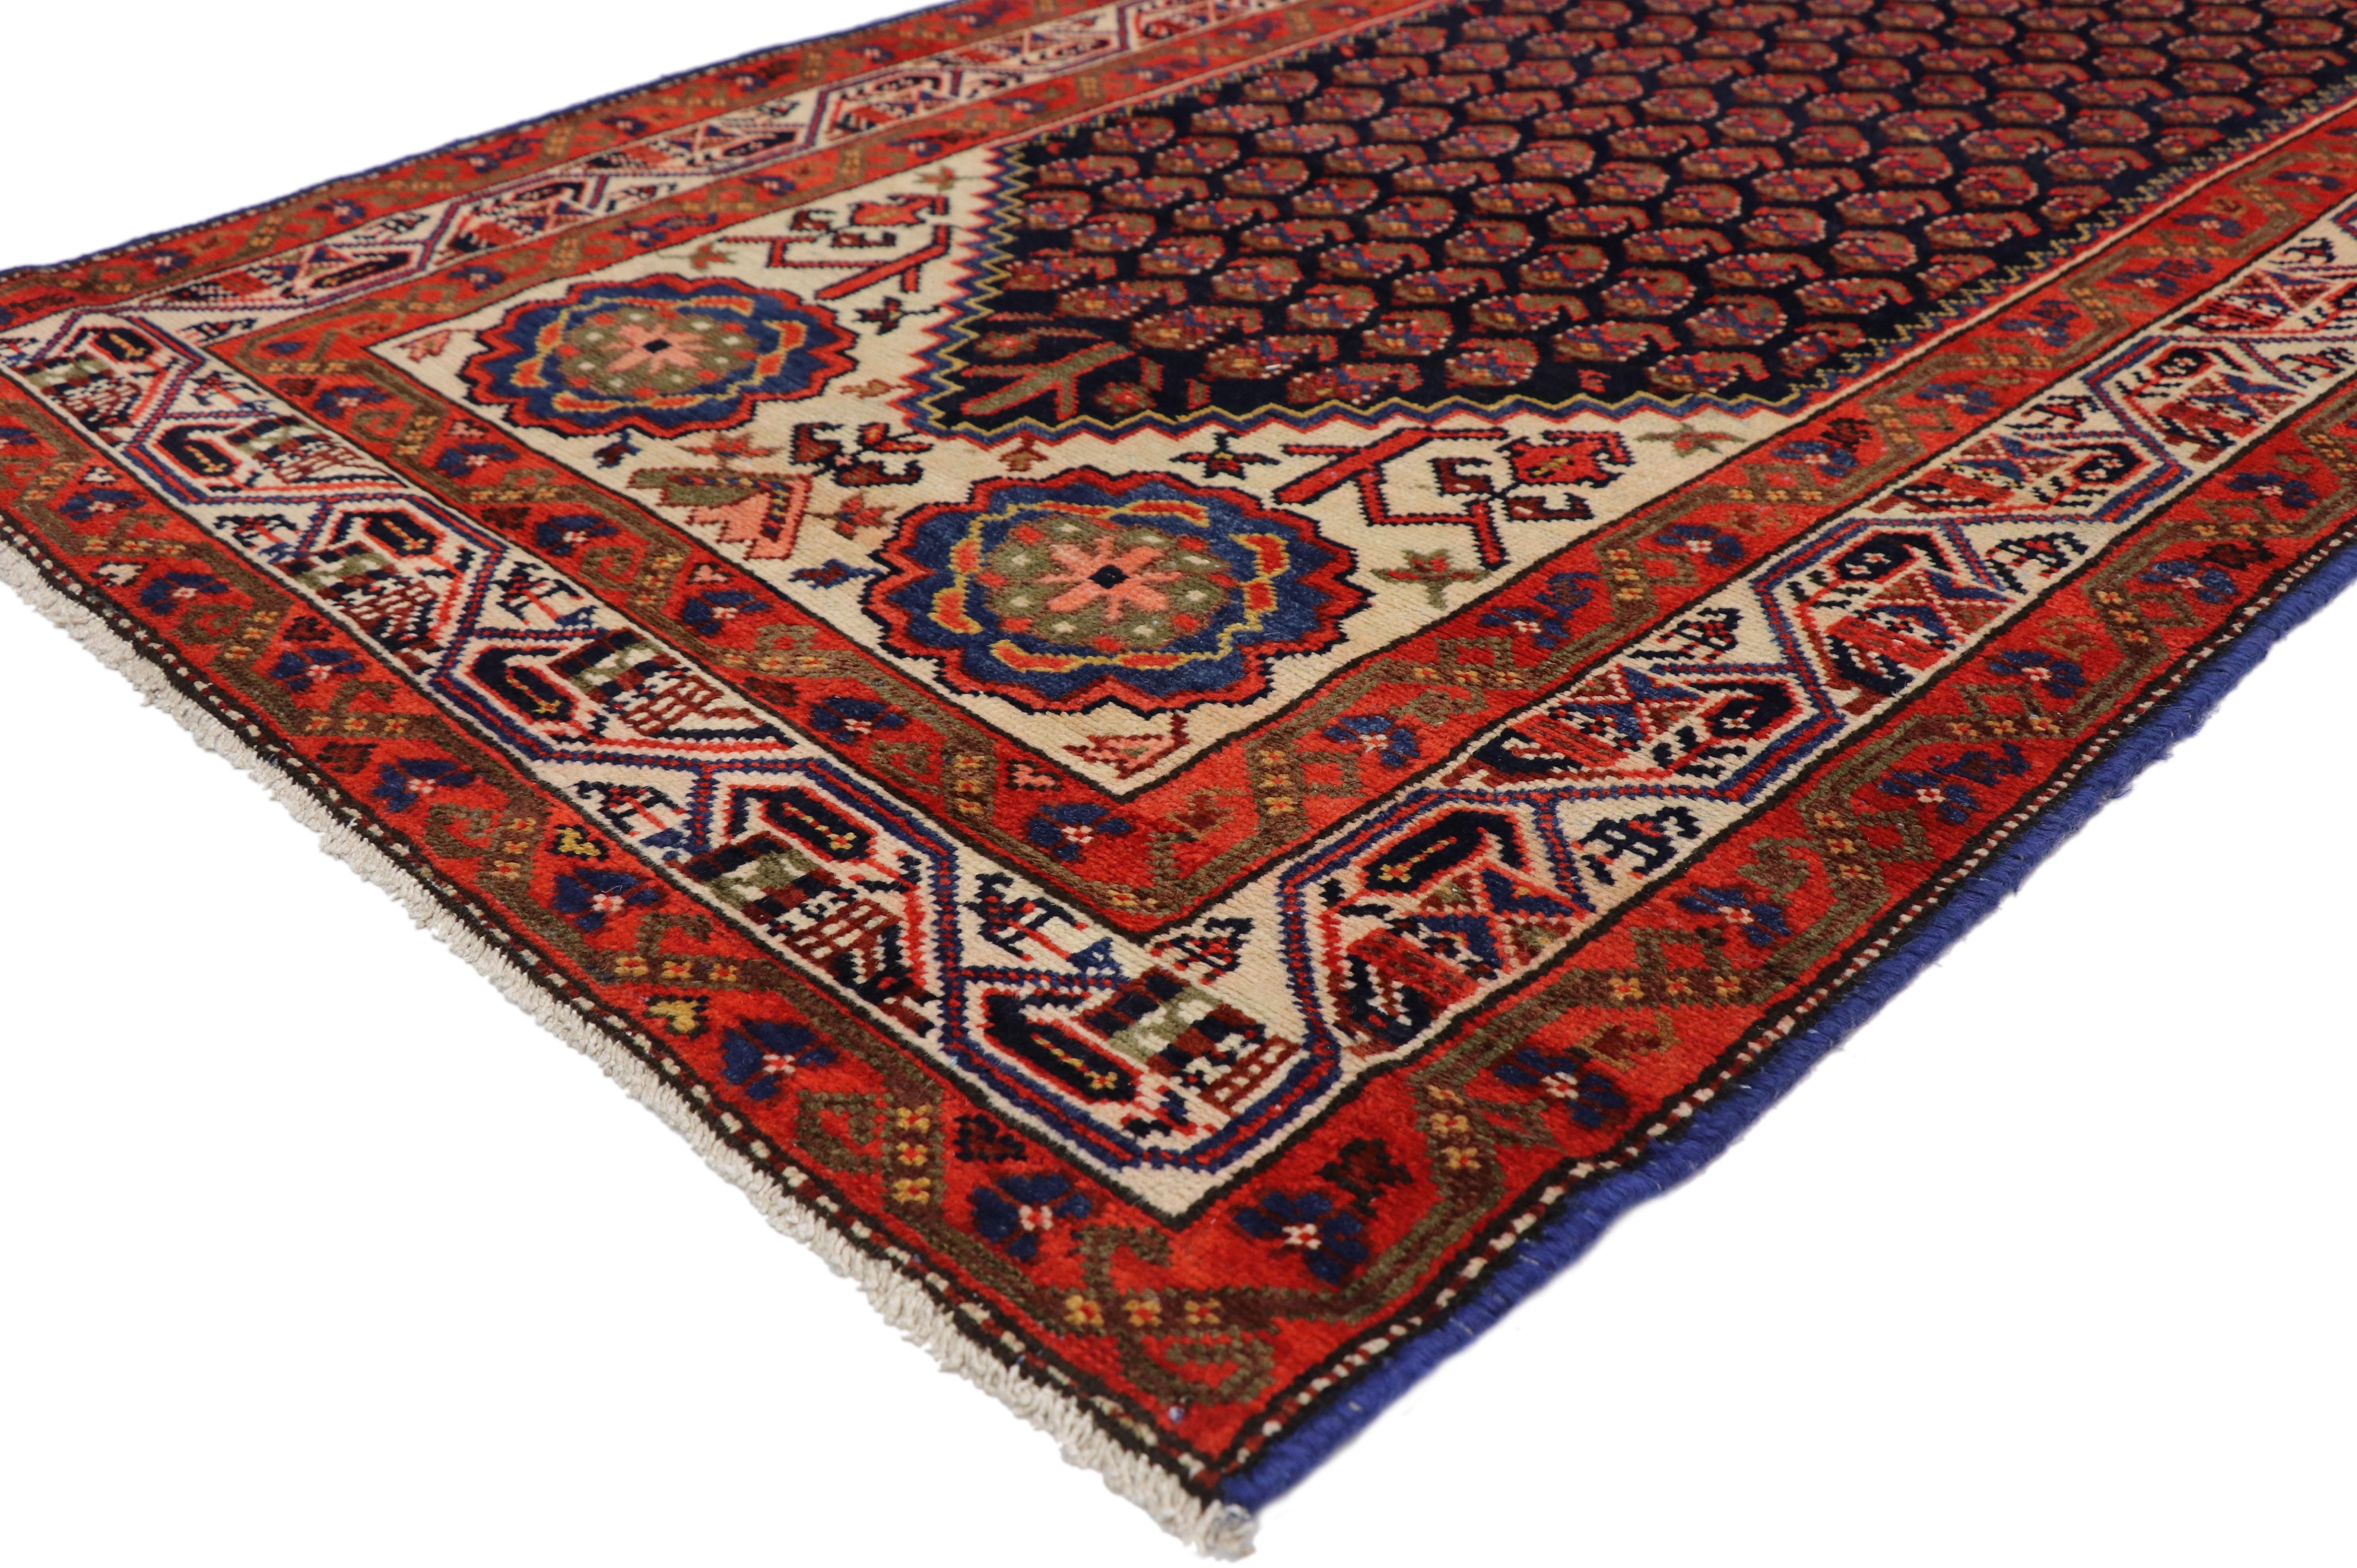 76586 antique Persian Malayer Runner with English Manor House Tudor style. Dignified with bespoke style, this antique Persian Malayer runner displays an all-over repetitive pattern of opulent boteh motifs. The widely used boteh motif is thought to